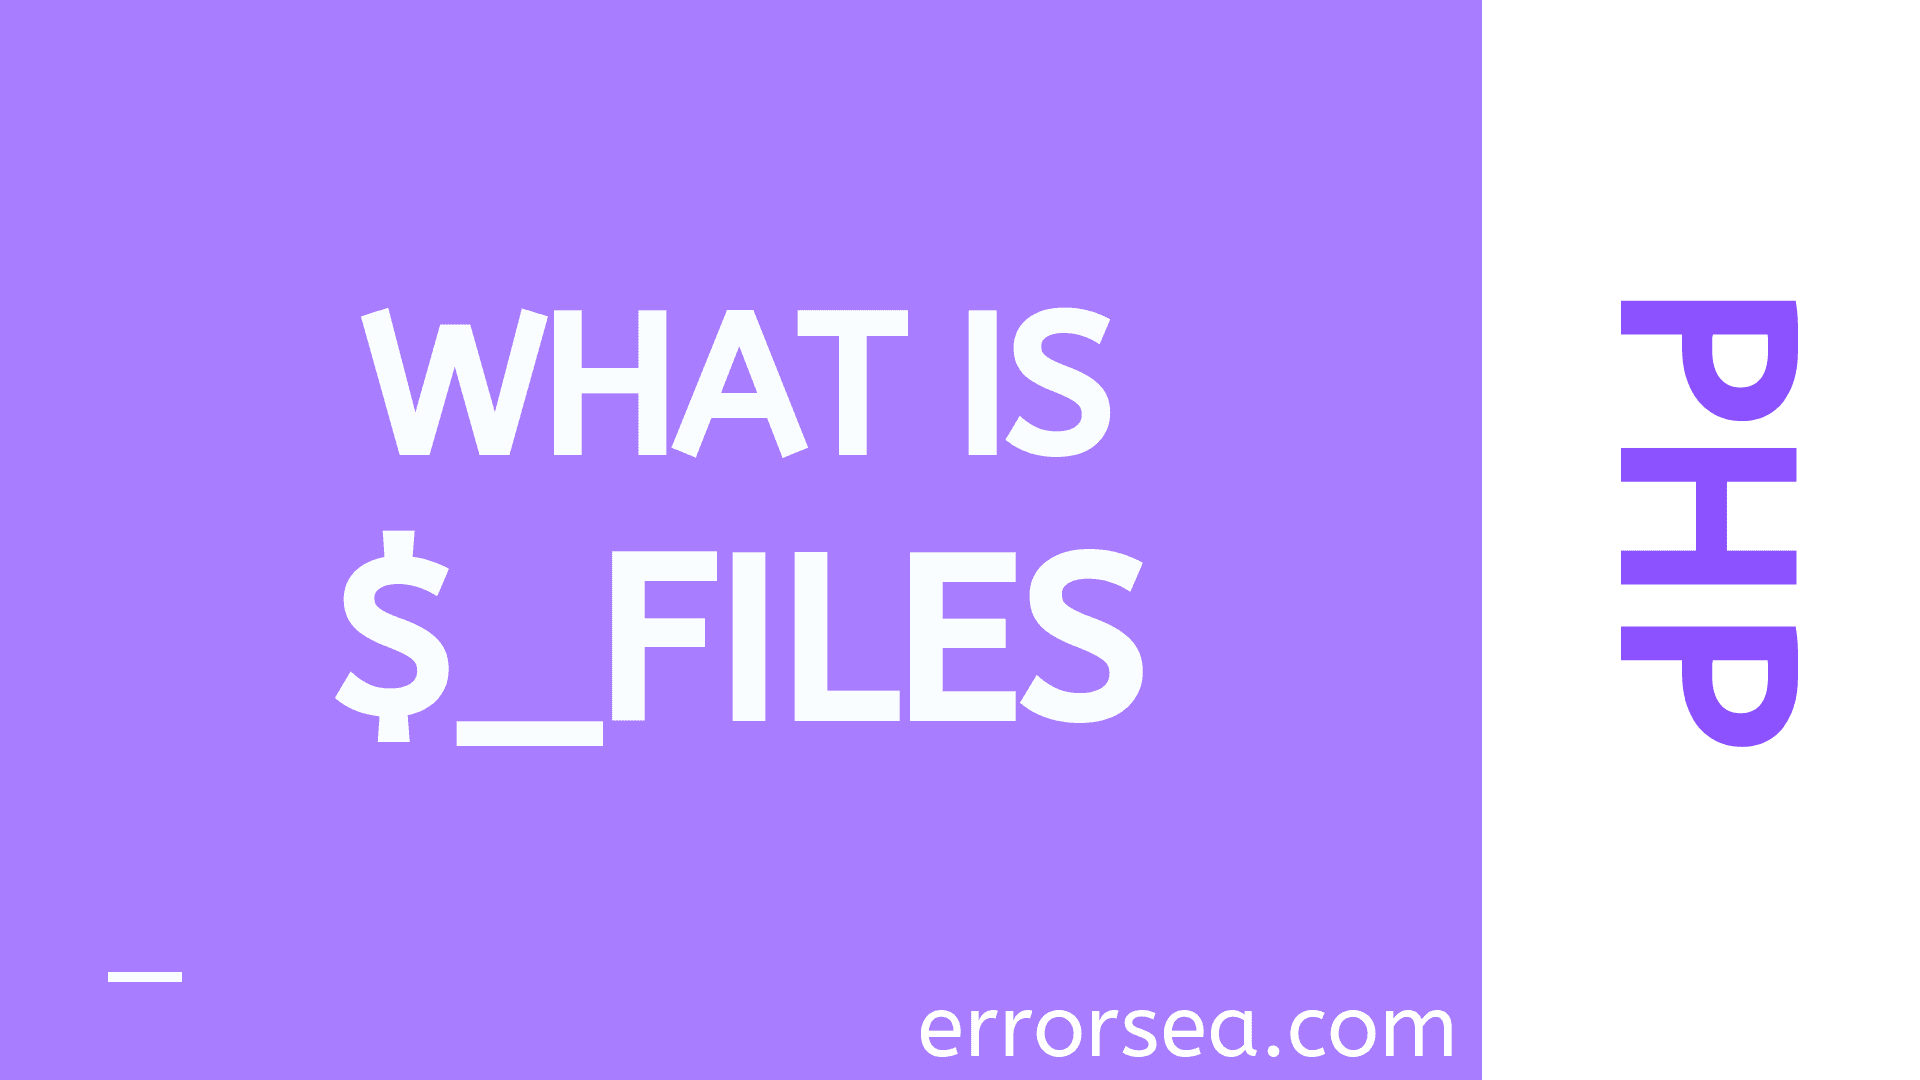 What Is the PHP $_FILES, and How to Use $_FILES